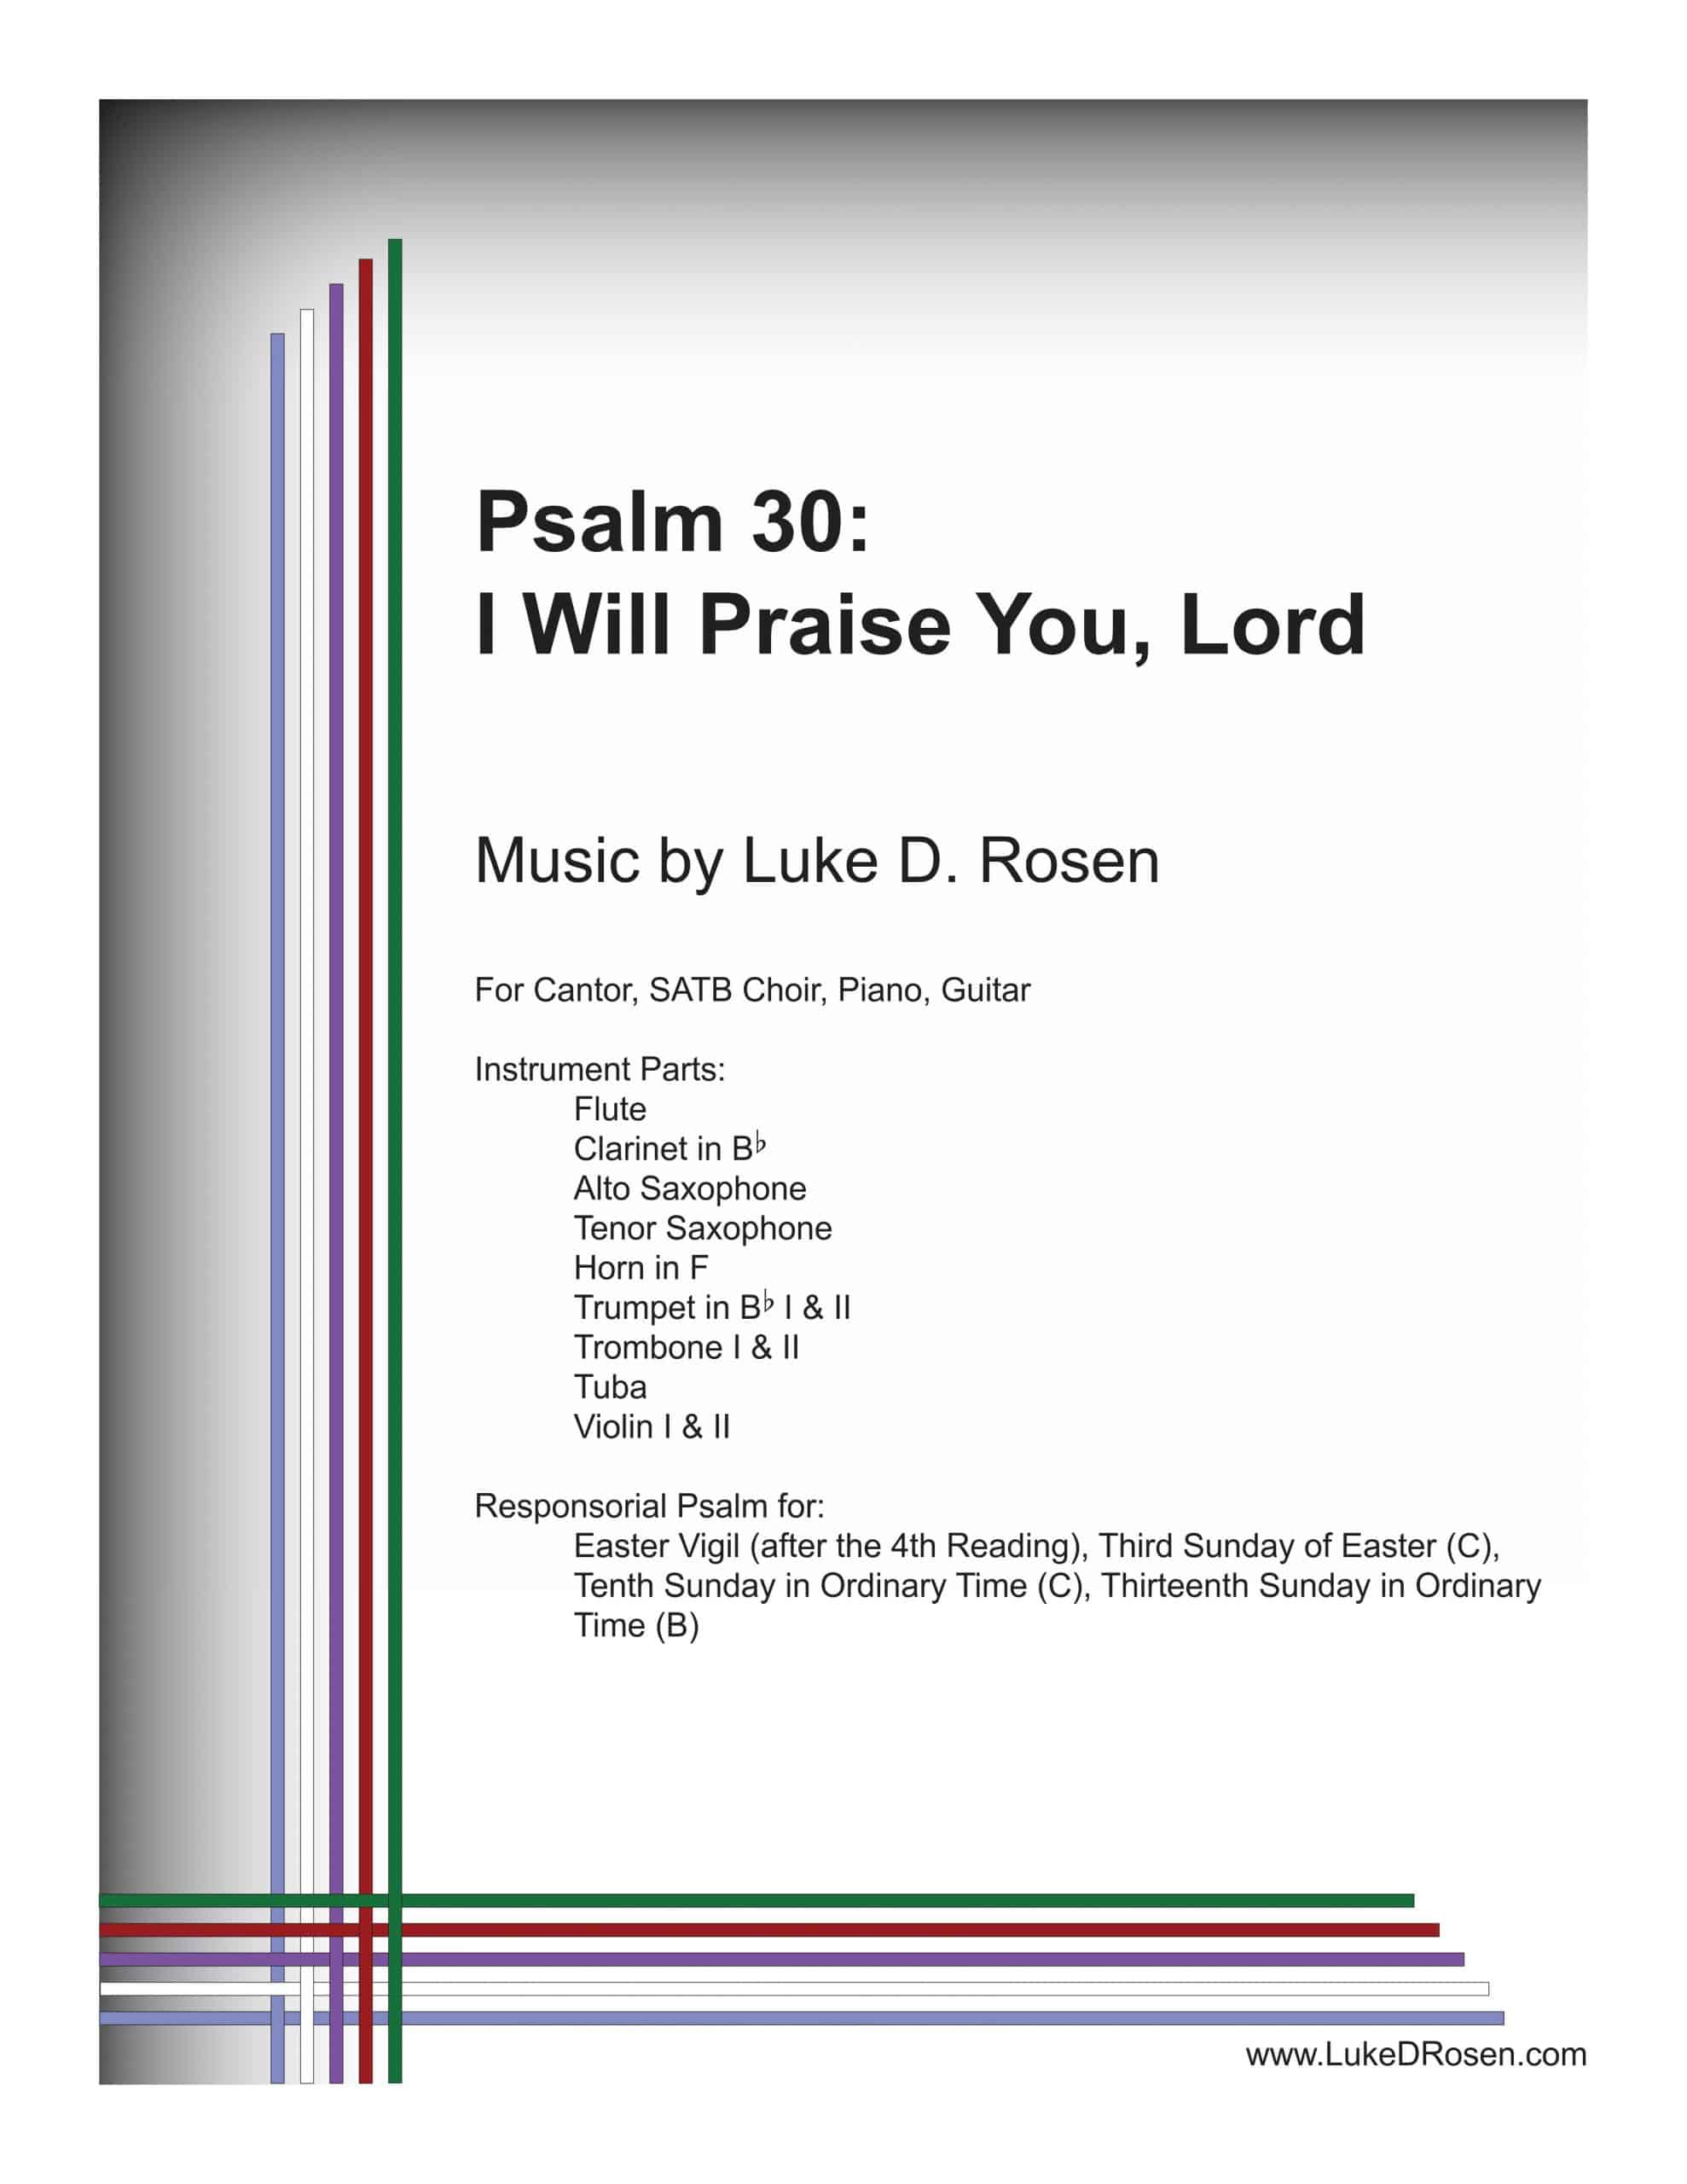 Psalm 30 – I Will Praise You, Lord (Rosen)